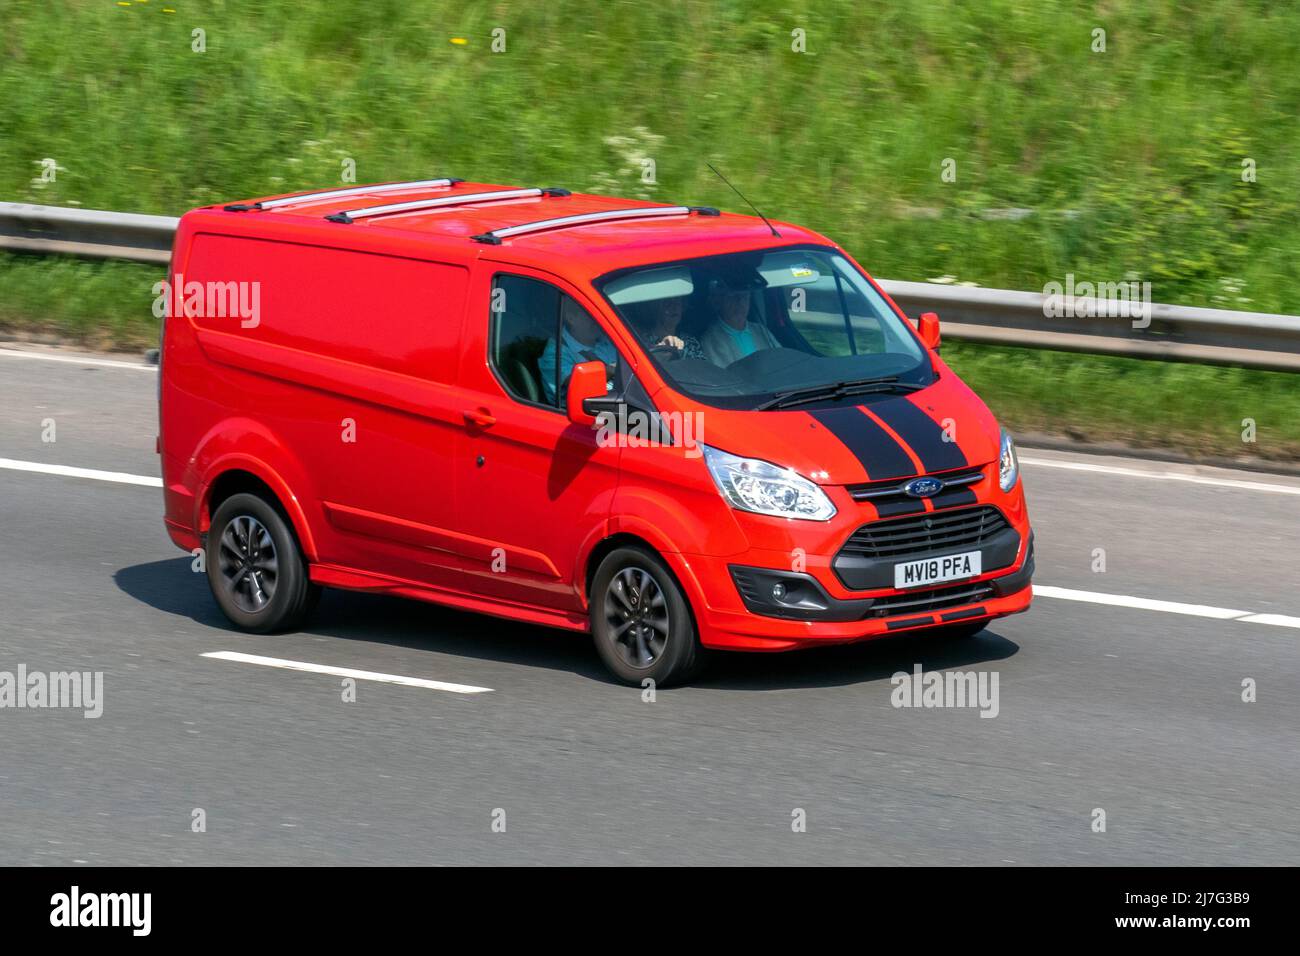 Page 11 - Ford transit van High Resolution Stock Photography and Images -  Alamy